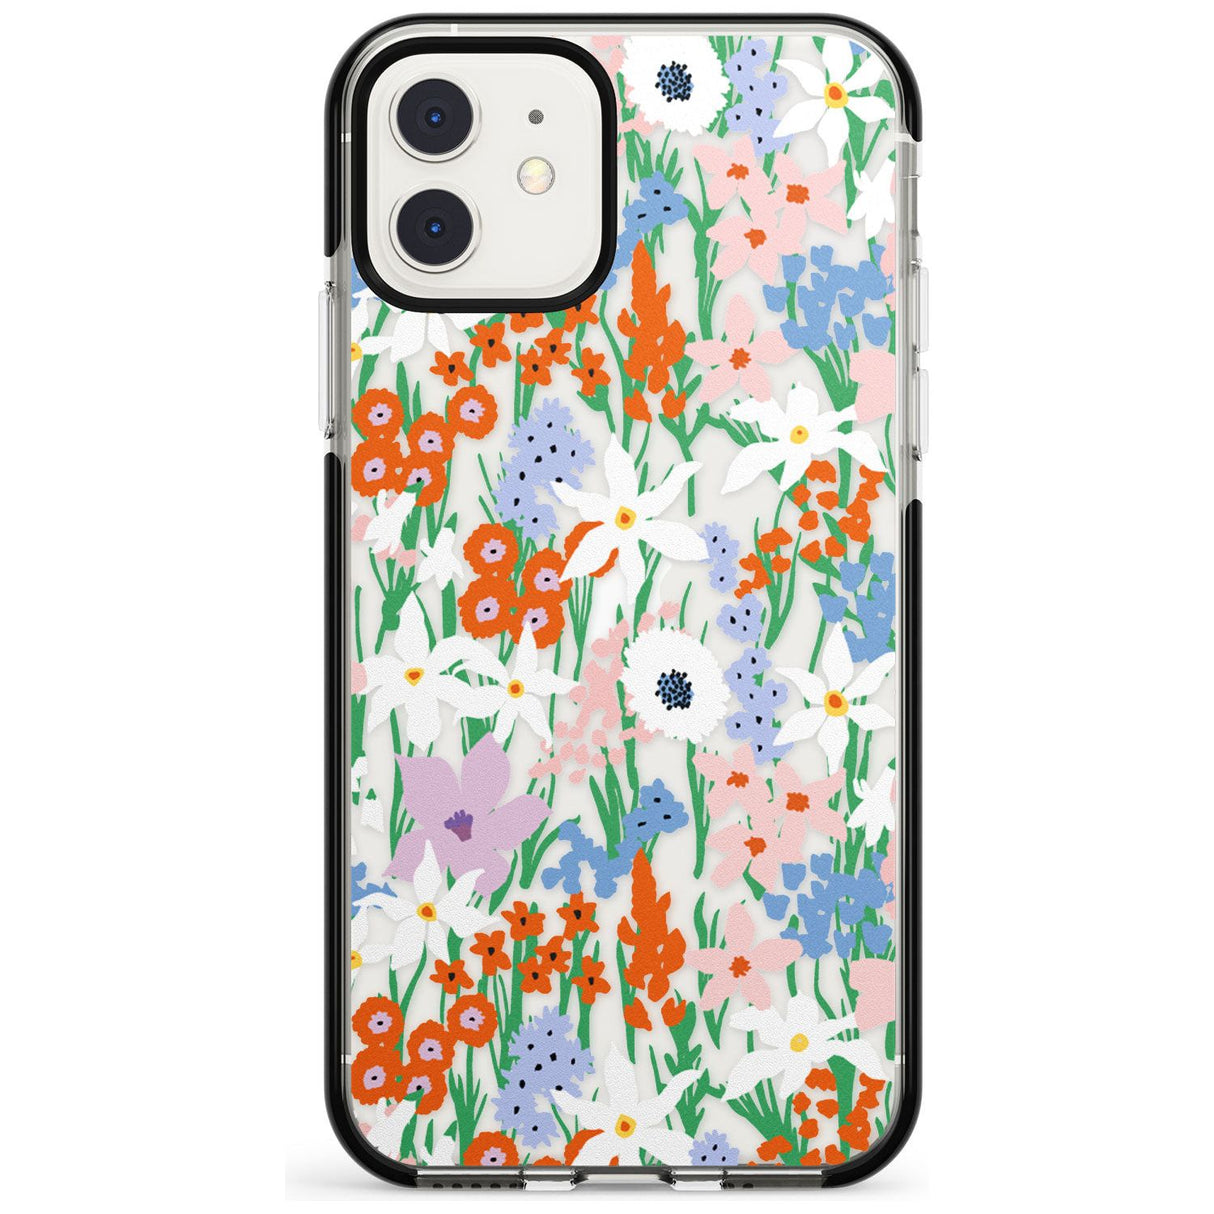 Springtime Meadow: Transparent Pink Fade Impact Phone Case for iPhone 11 Pro Max